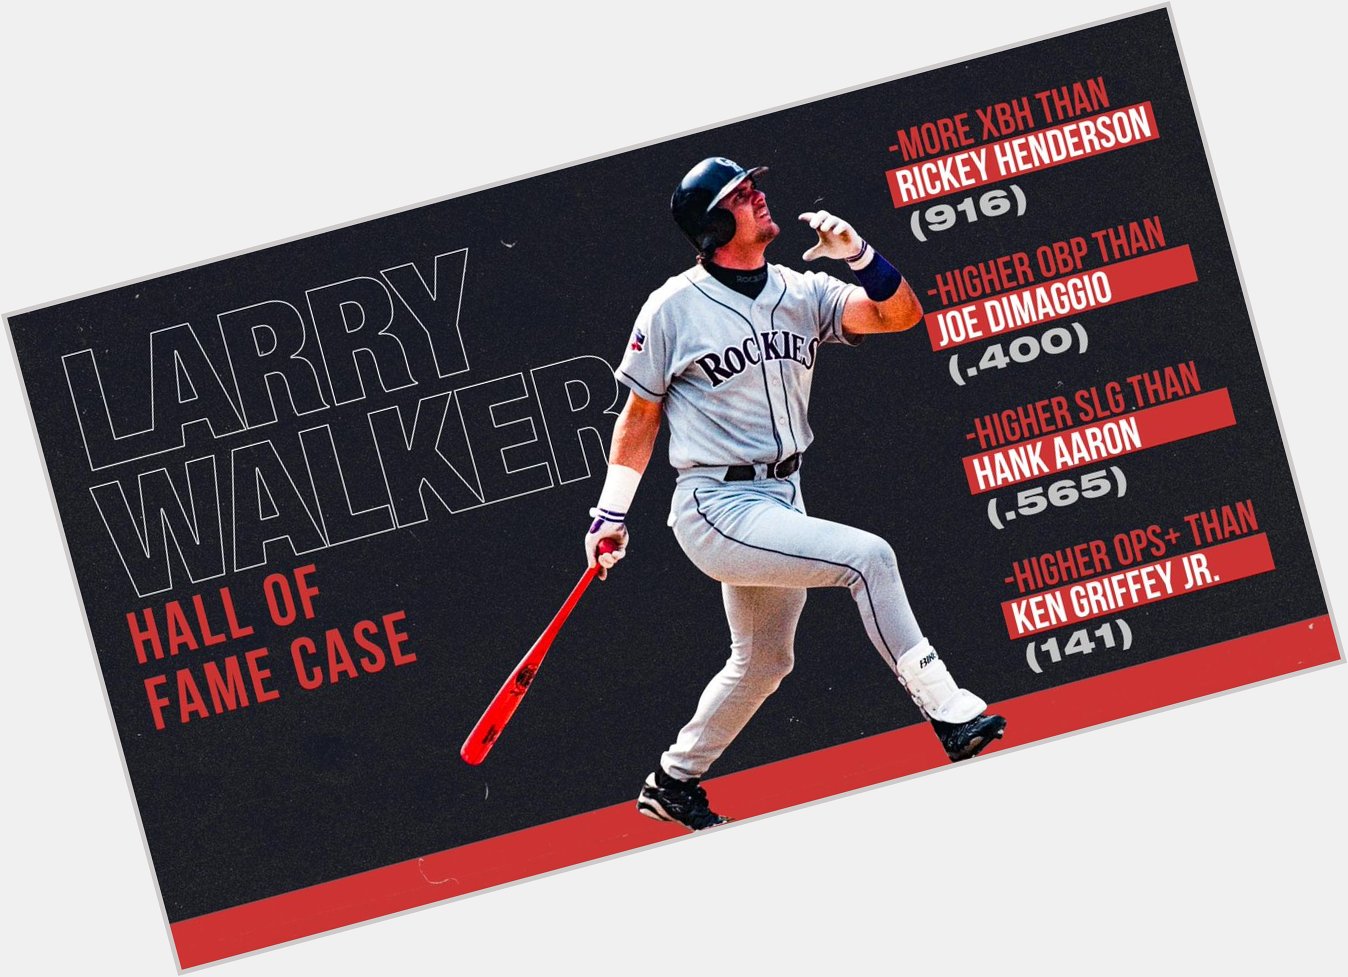 Happy Birthday Larry Walker! 

Will an invite to the be his this year? 